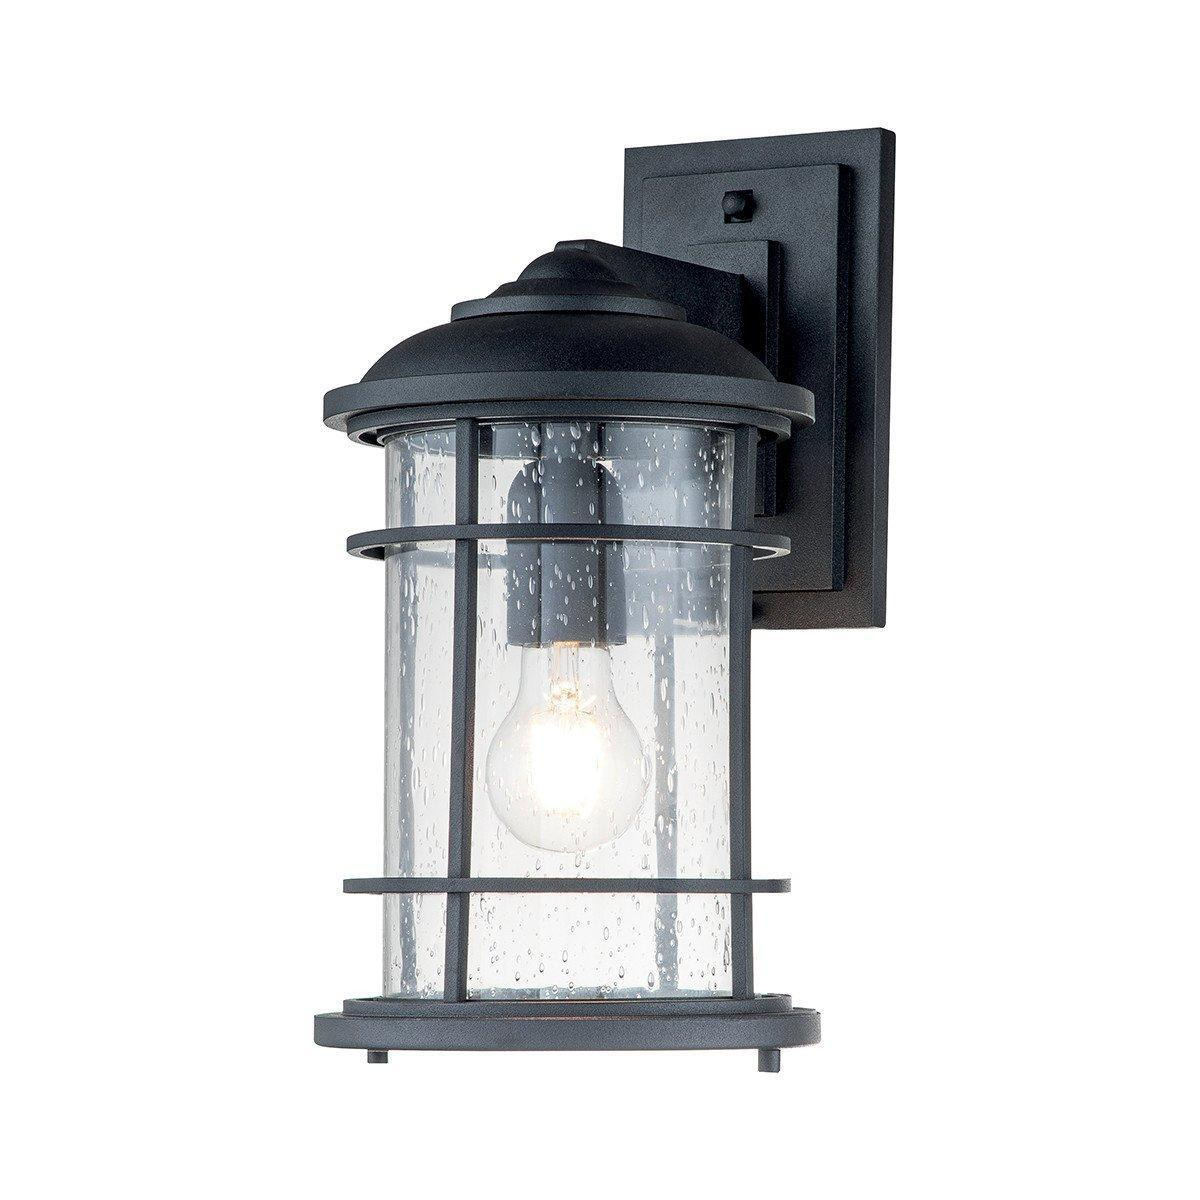 Feiss Lighthouse Outdoor Wall Lantern Textured Black IP44 - image 1